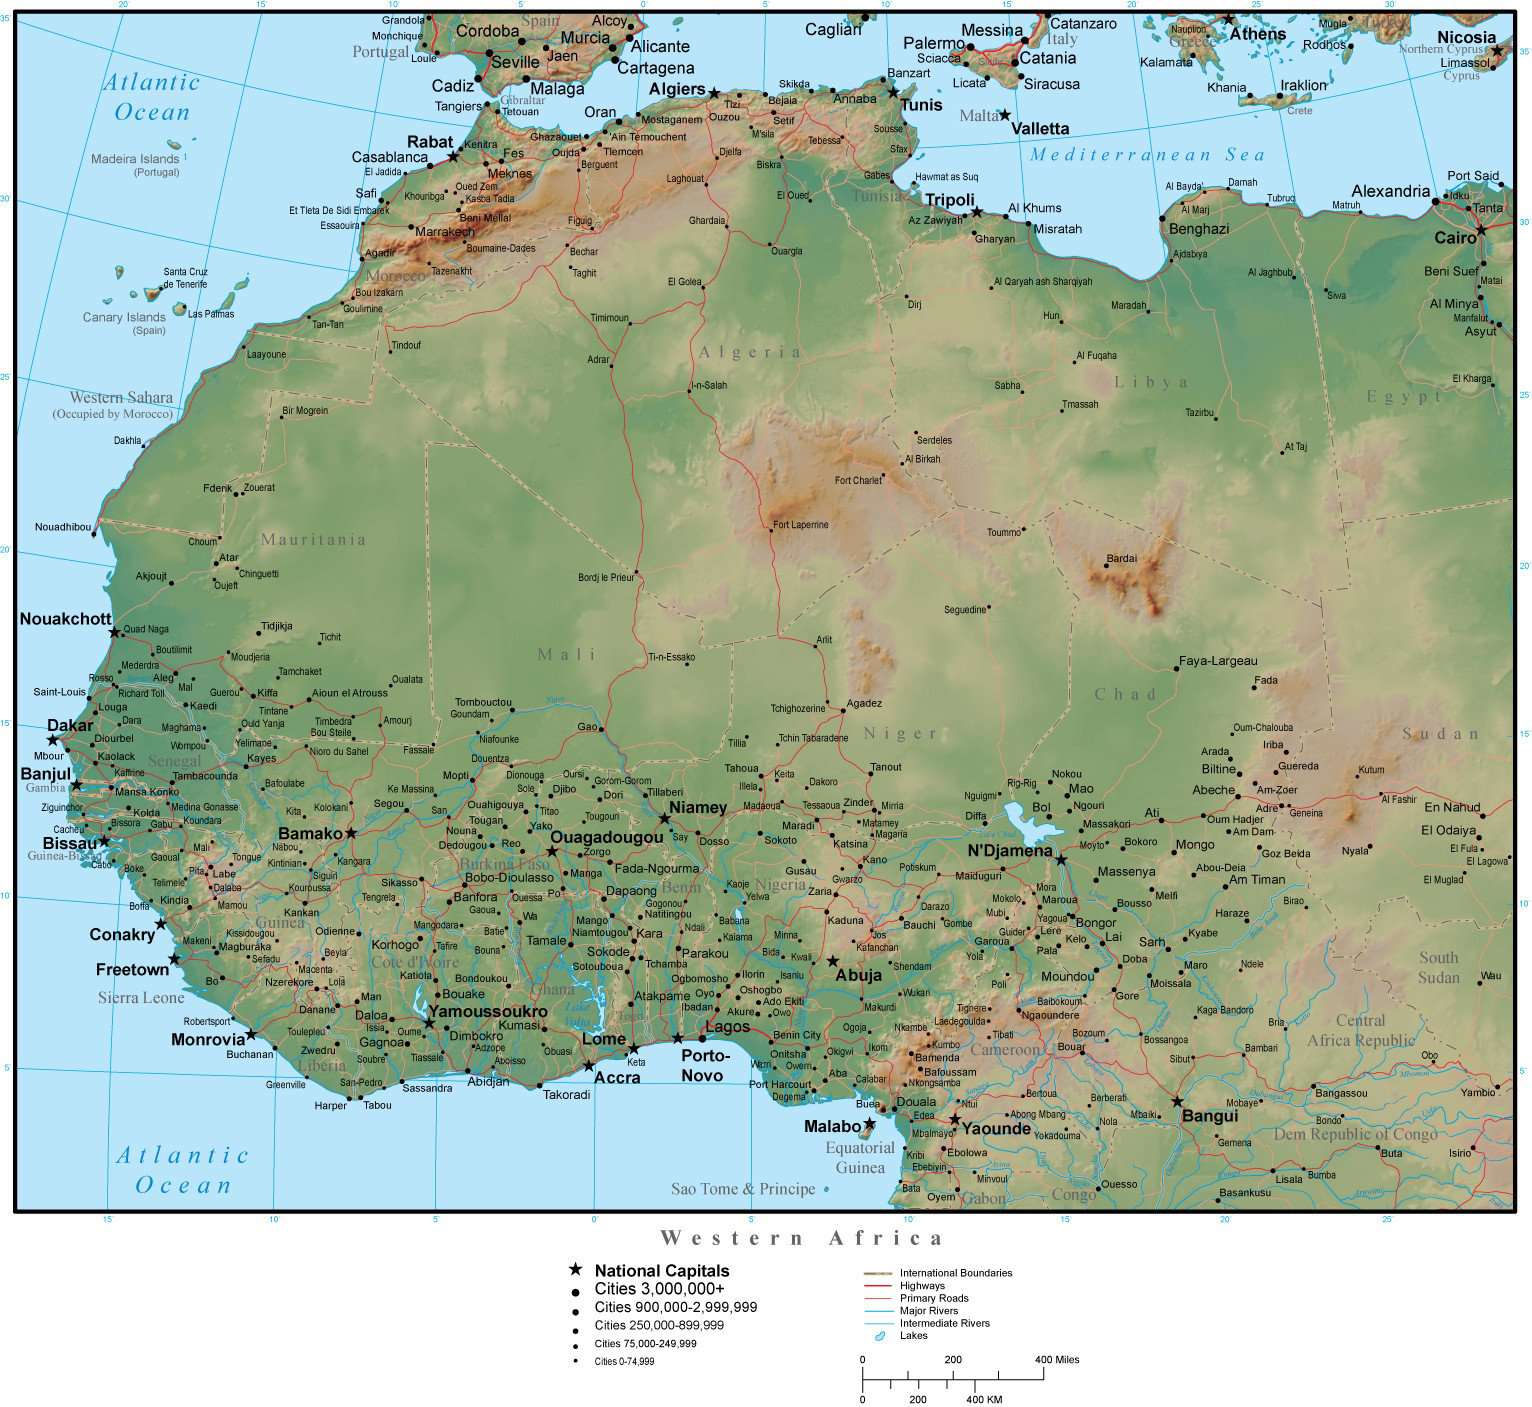 Western Africa Terrain Map In Adobe Illustrator Vector Format With Photoshop Terrain Image W 4931